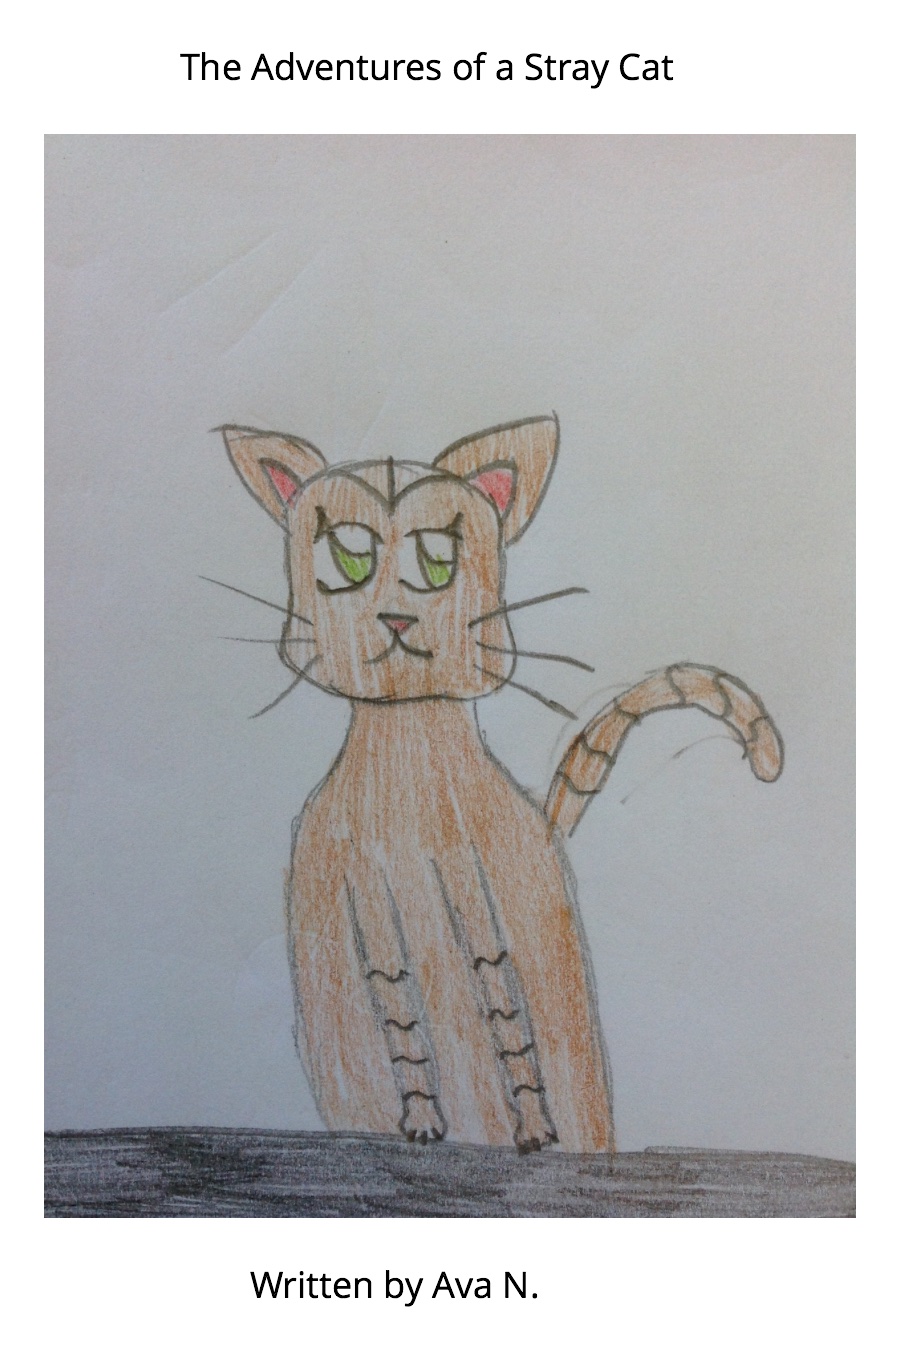 The Adventure of a Stray Cat by Ava N